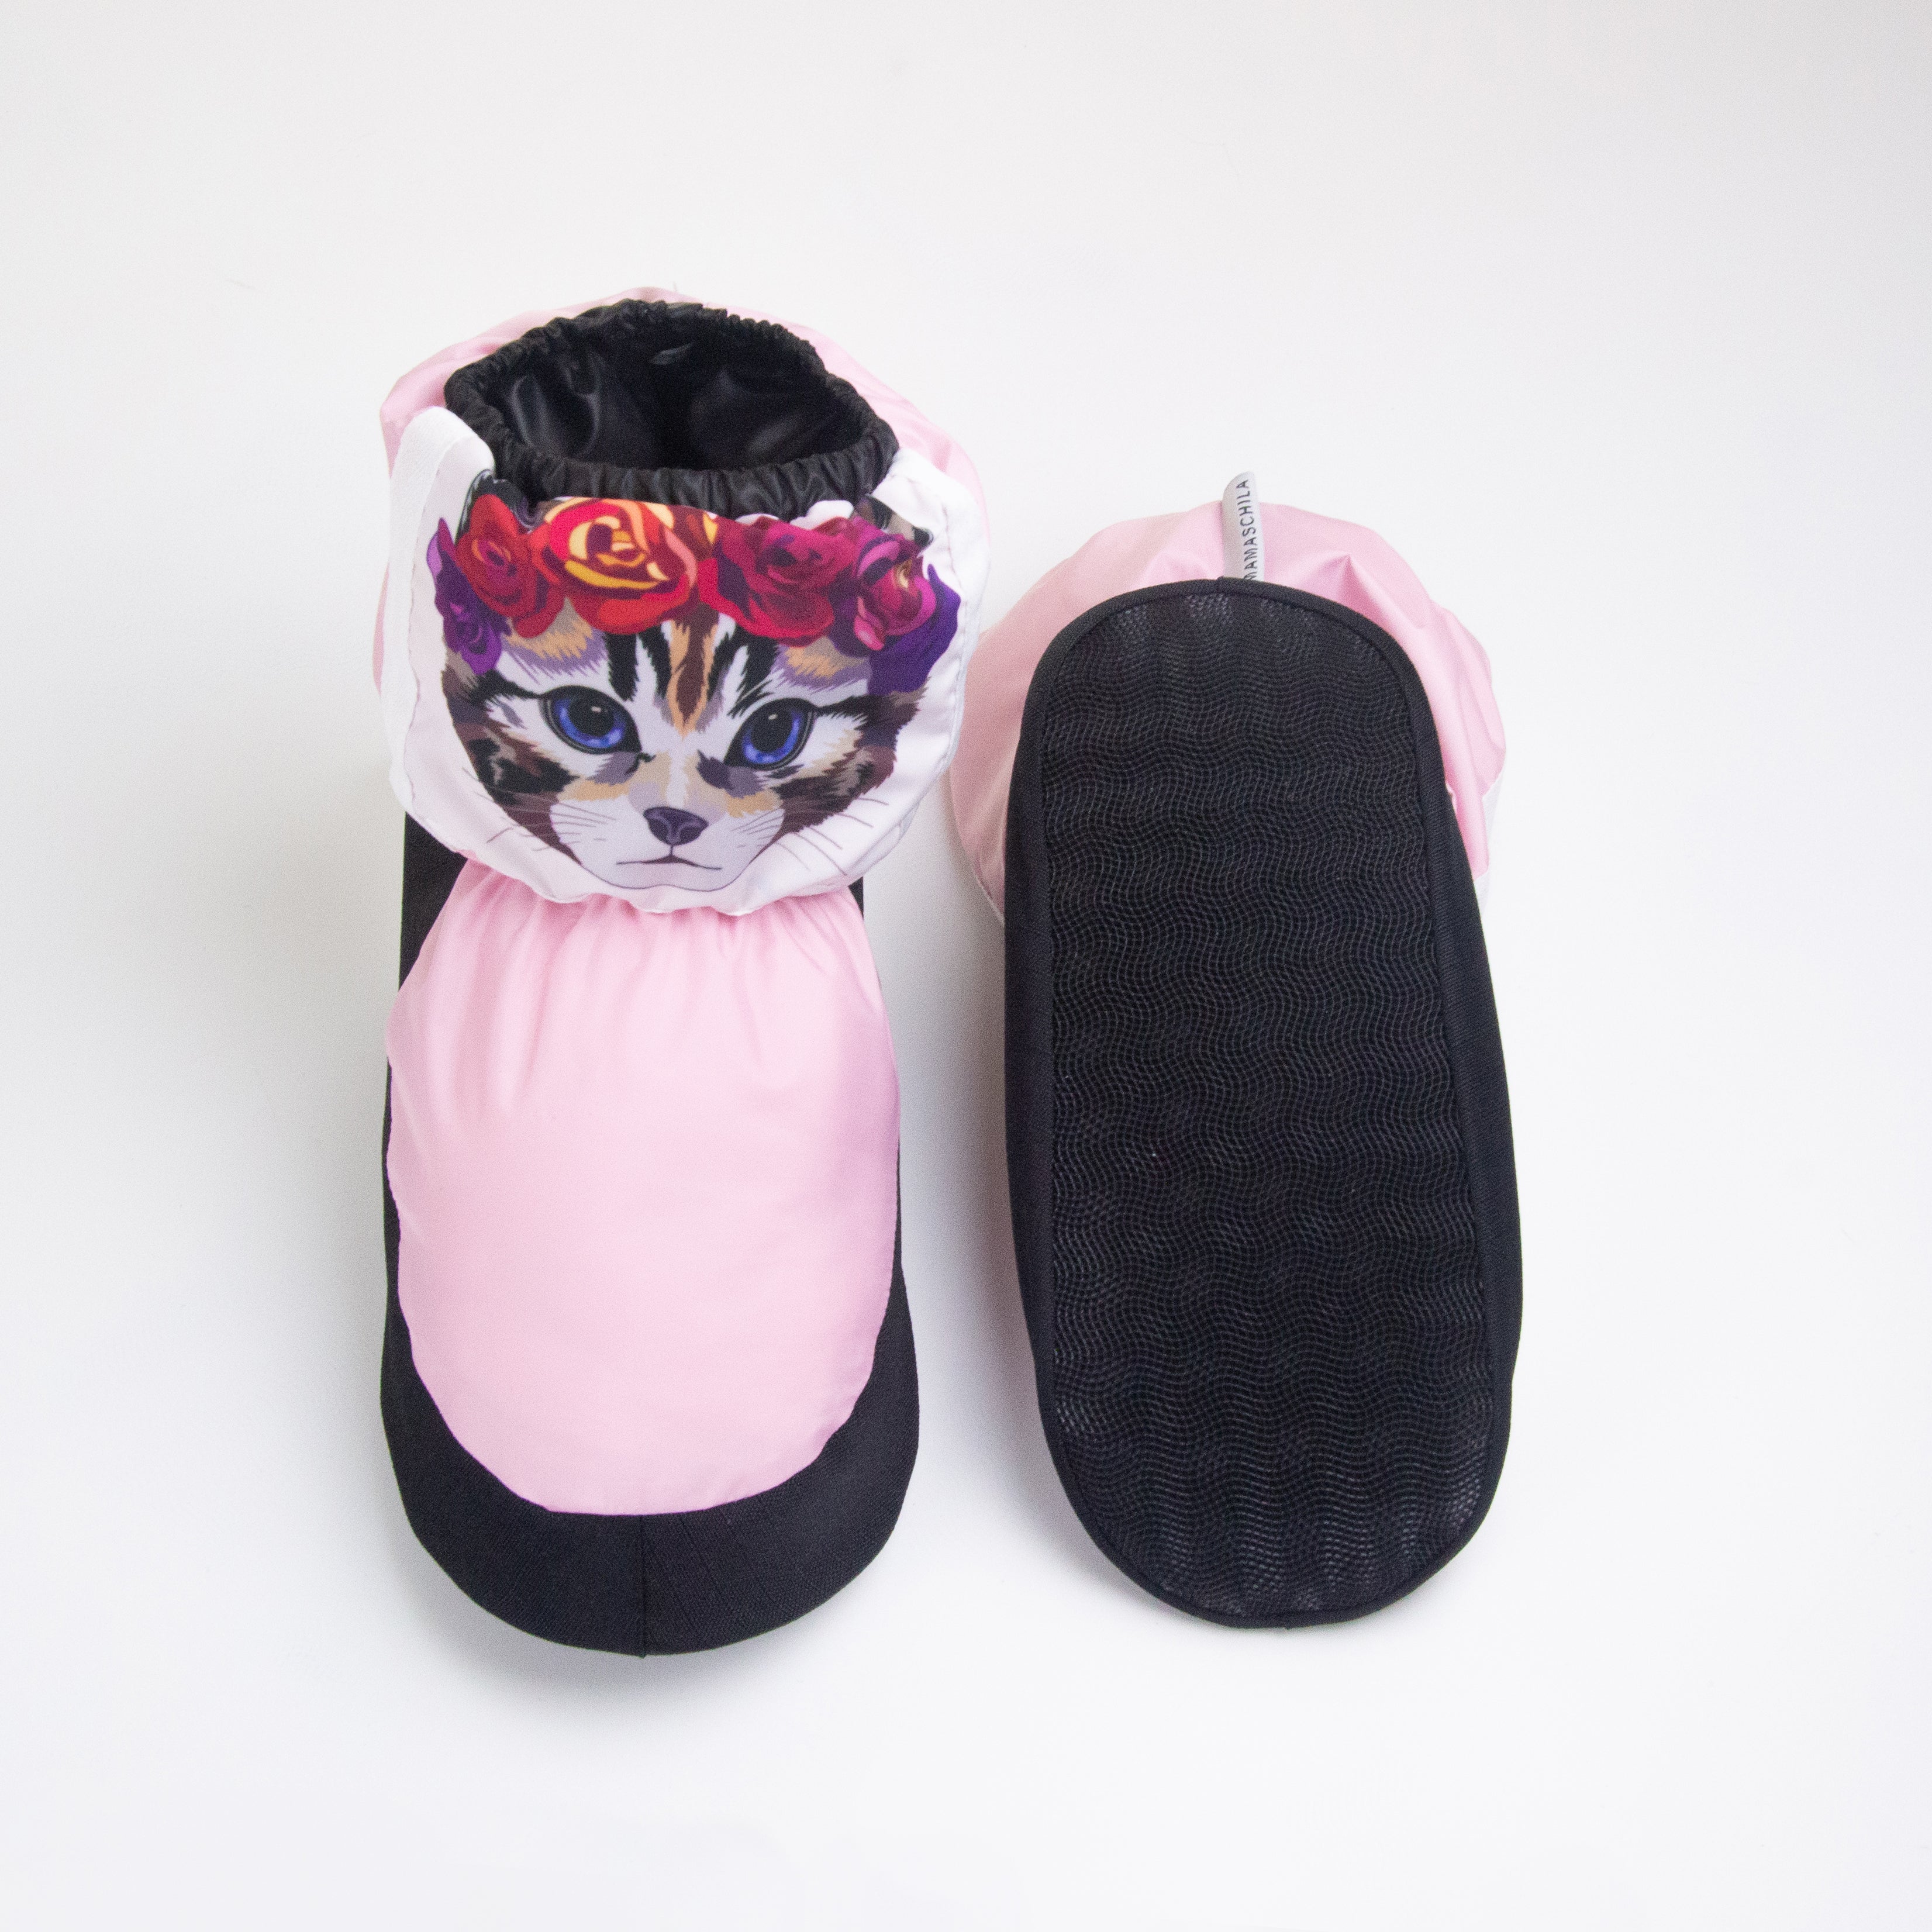 Kitty Face Ballet Booties - Dancewear by Patricia